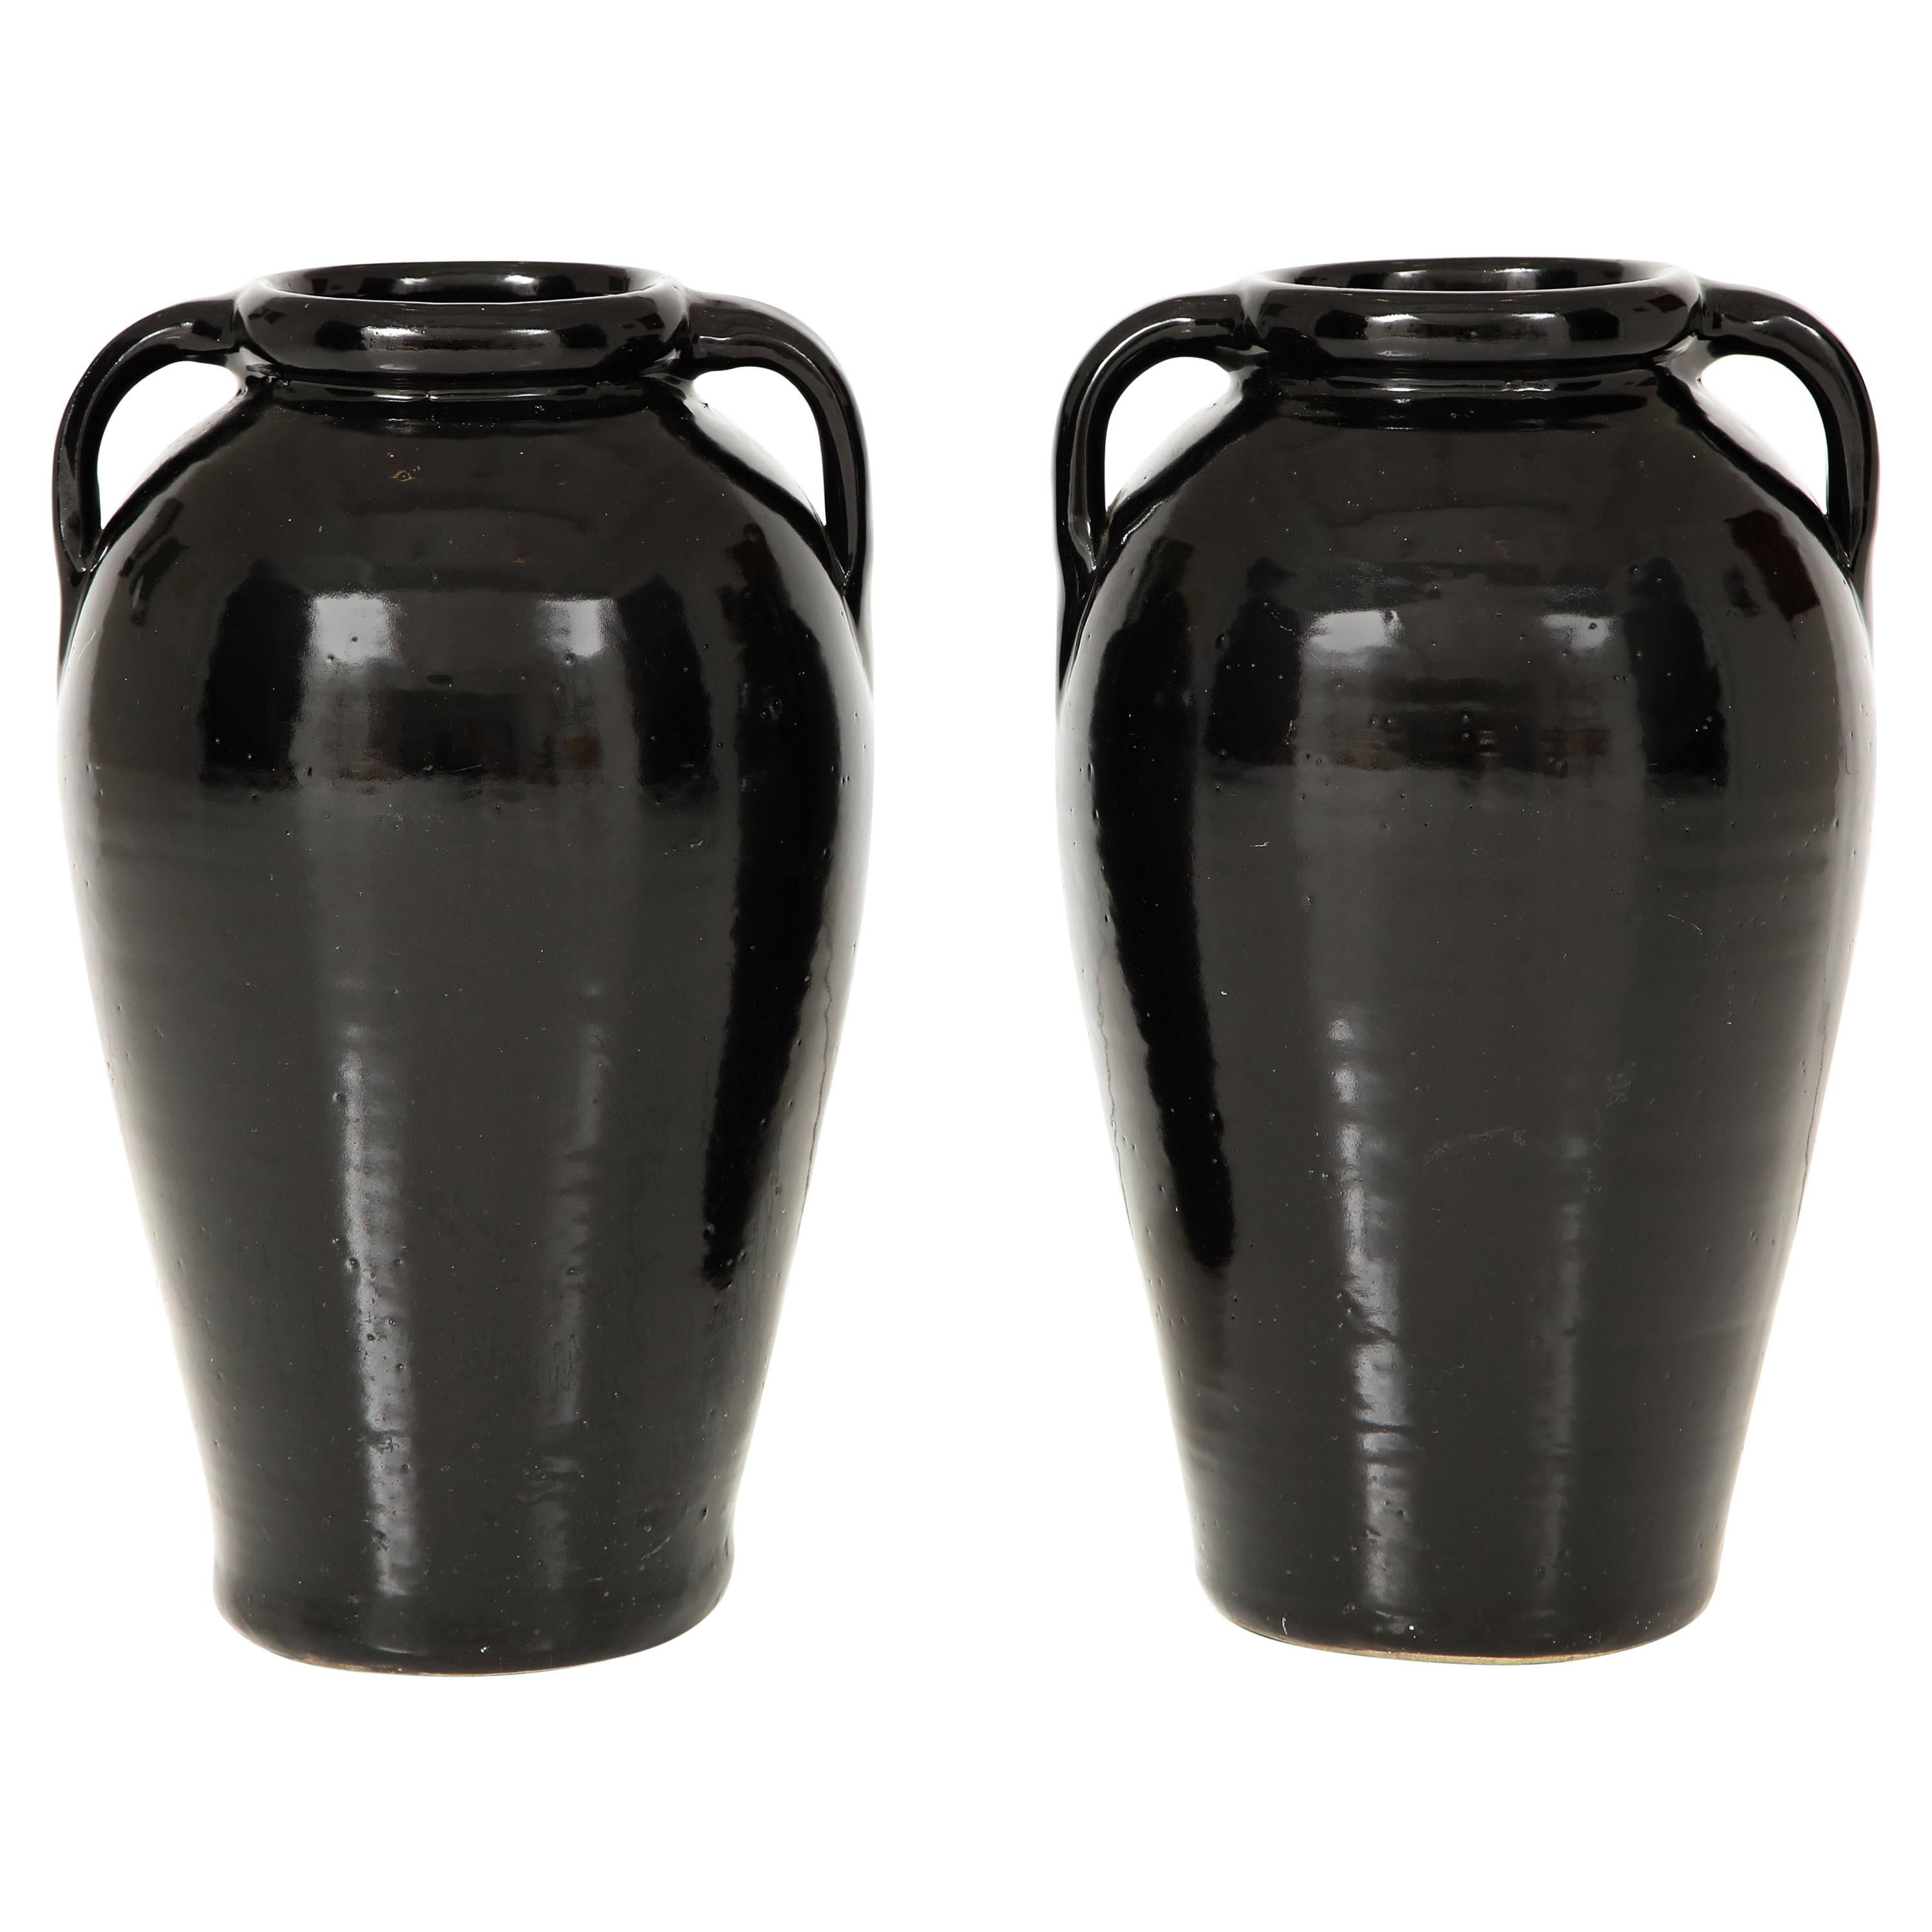 Pair of Black Glazed Stone Ware Vases or Jars with Handles